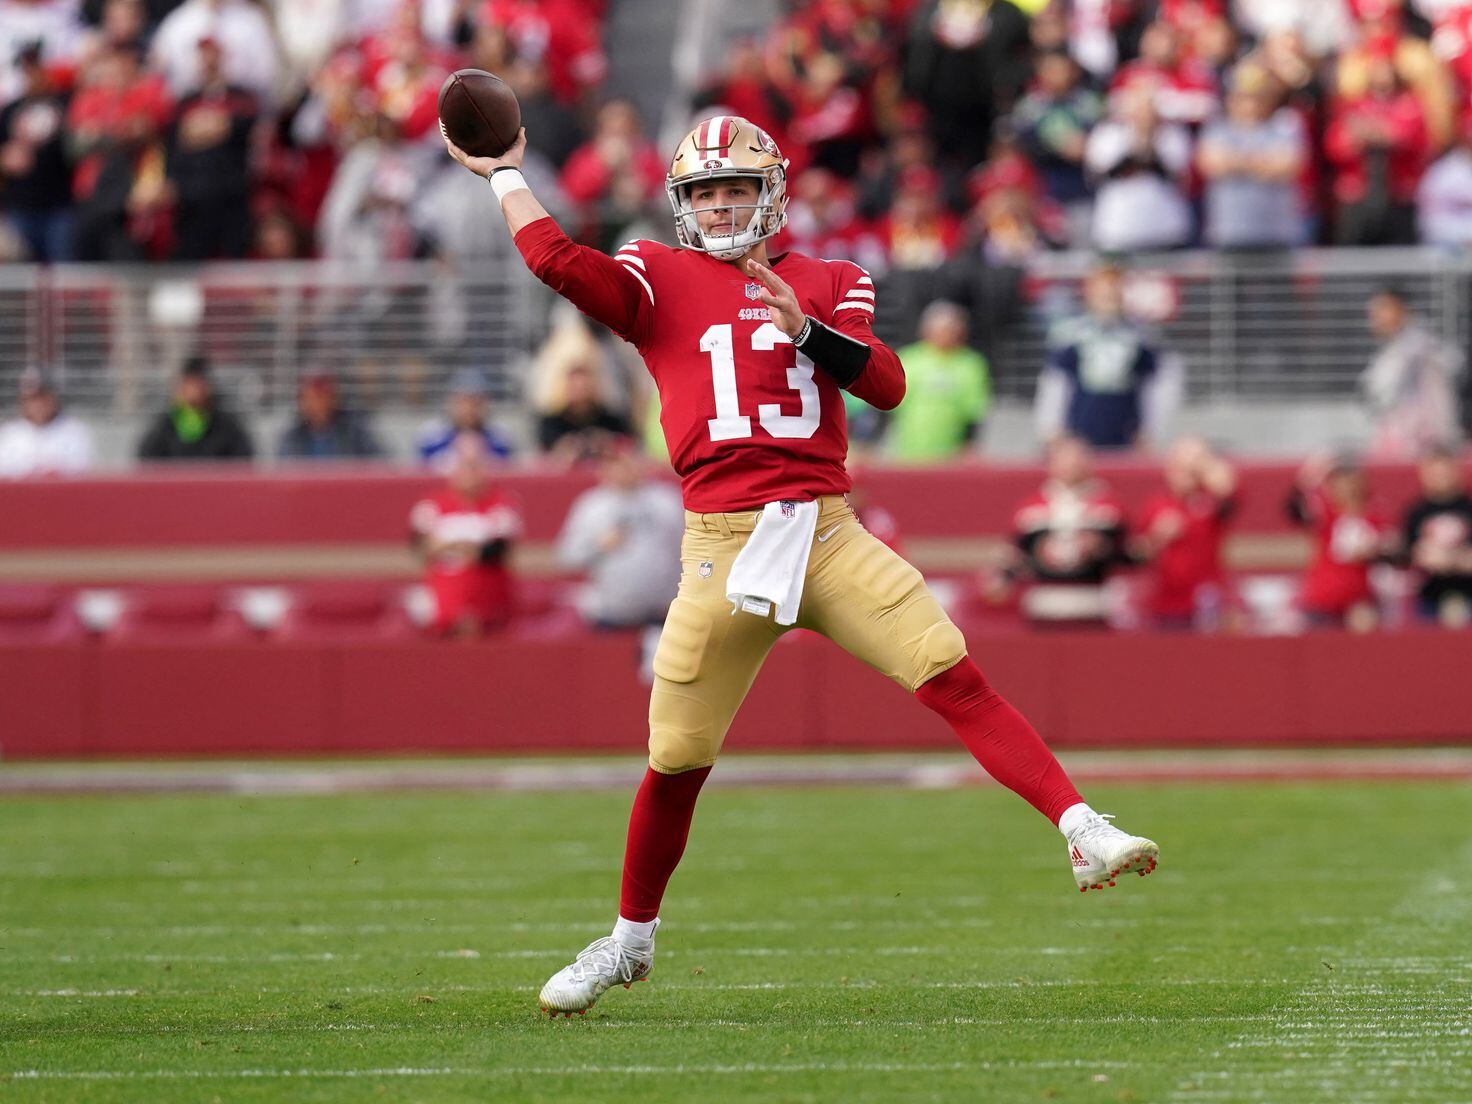 Josh Johnson takes over at quarterback for 49ers from injured